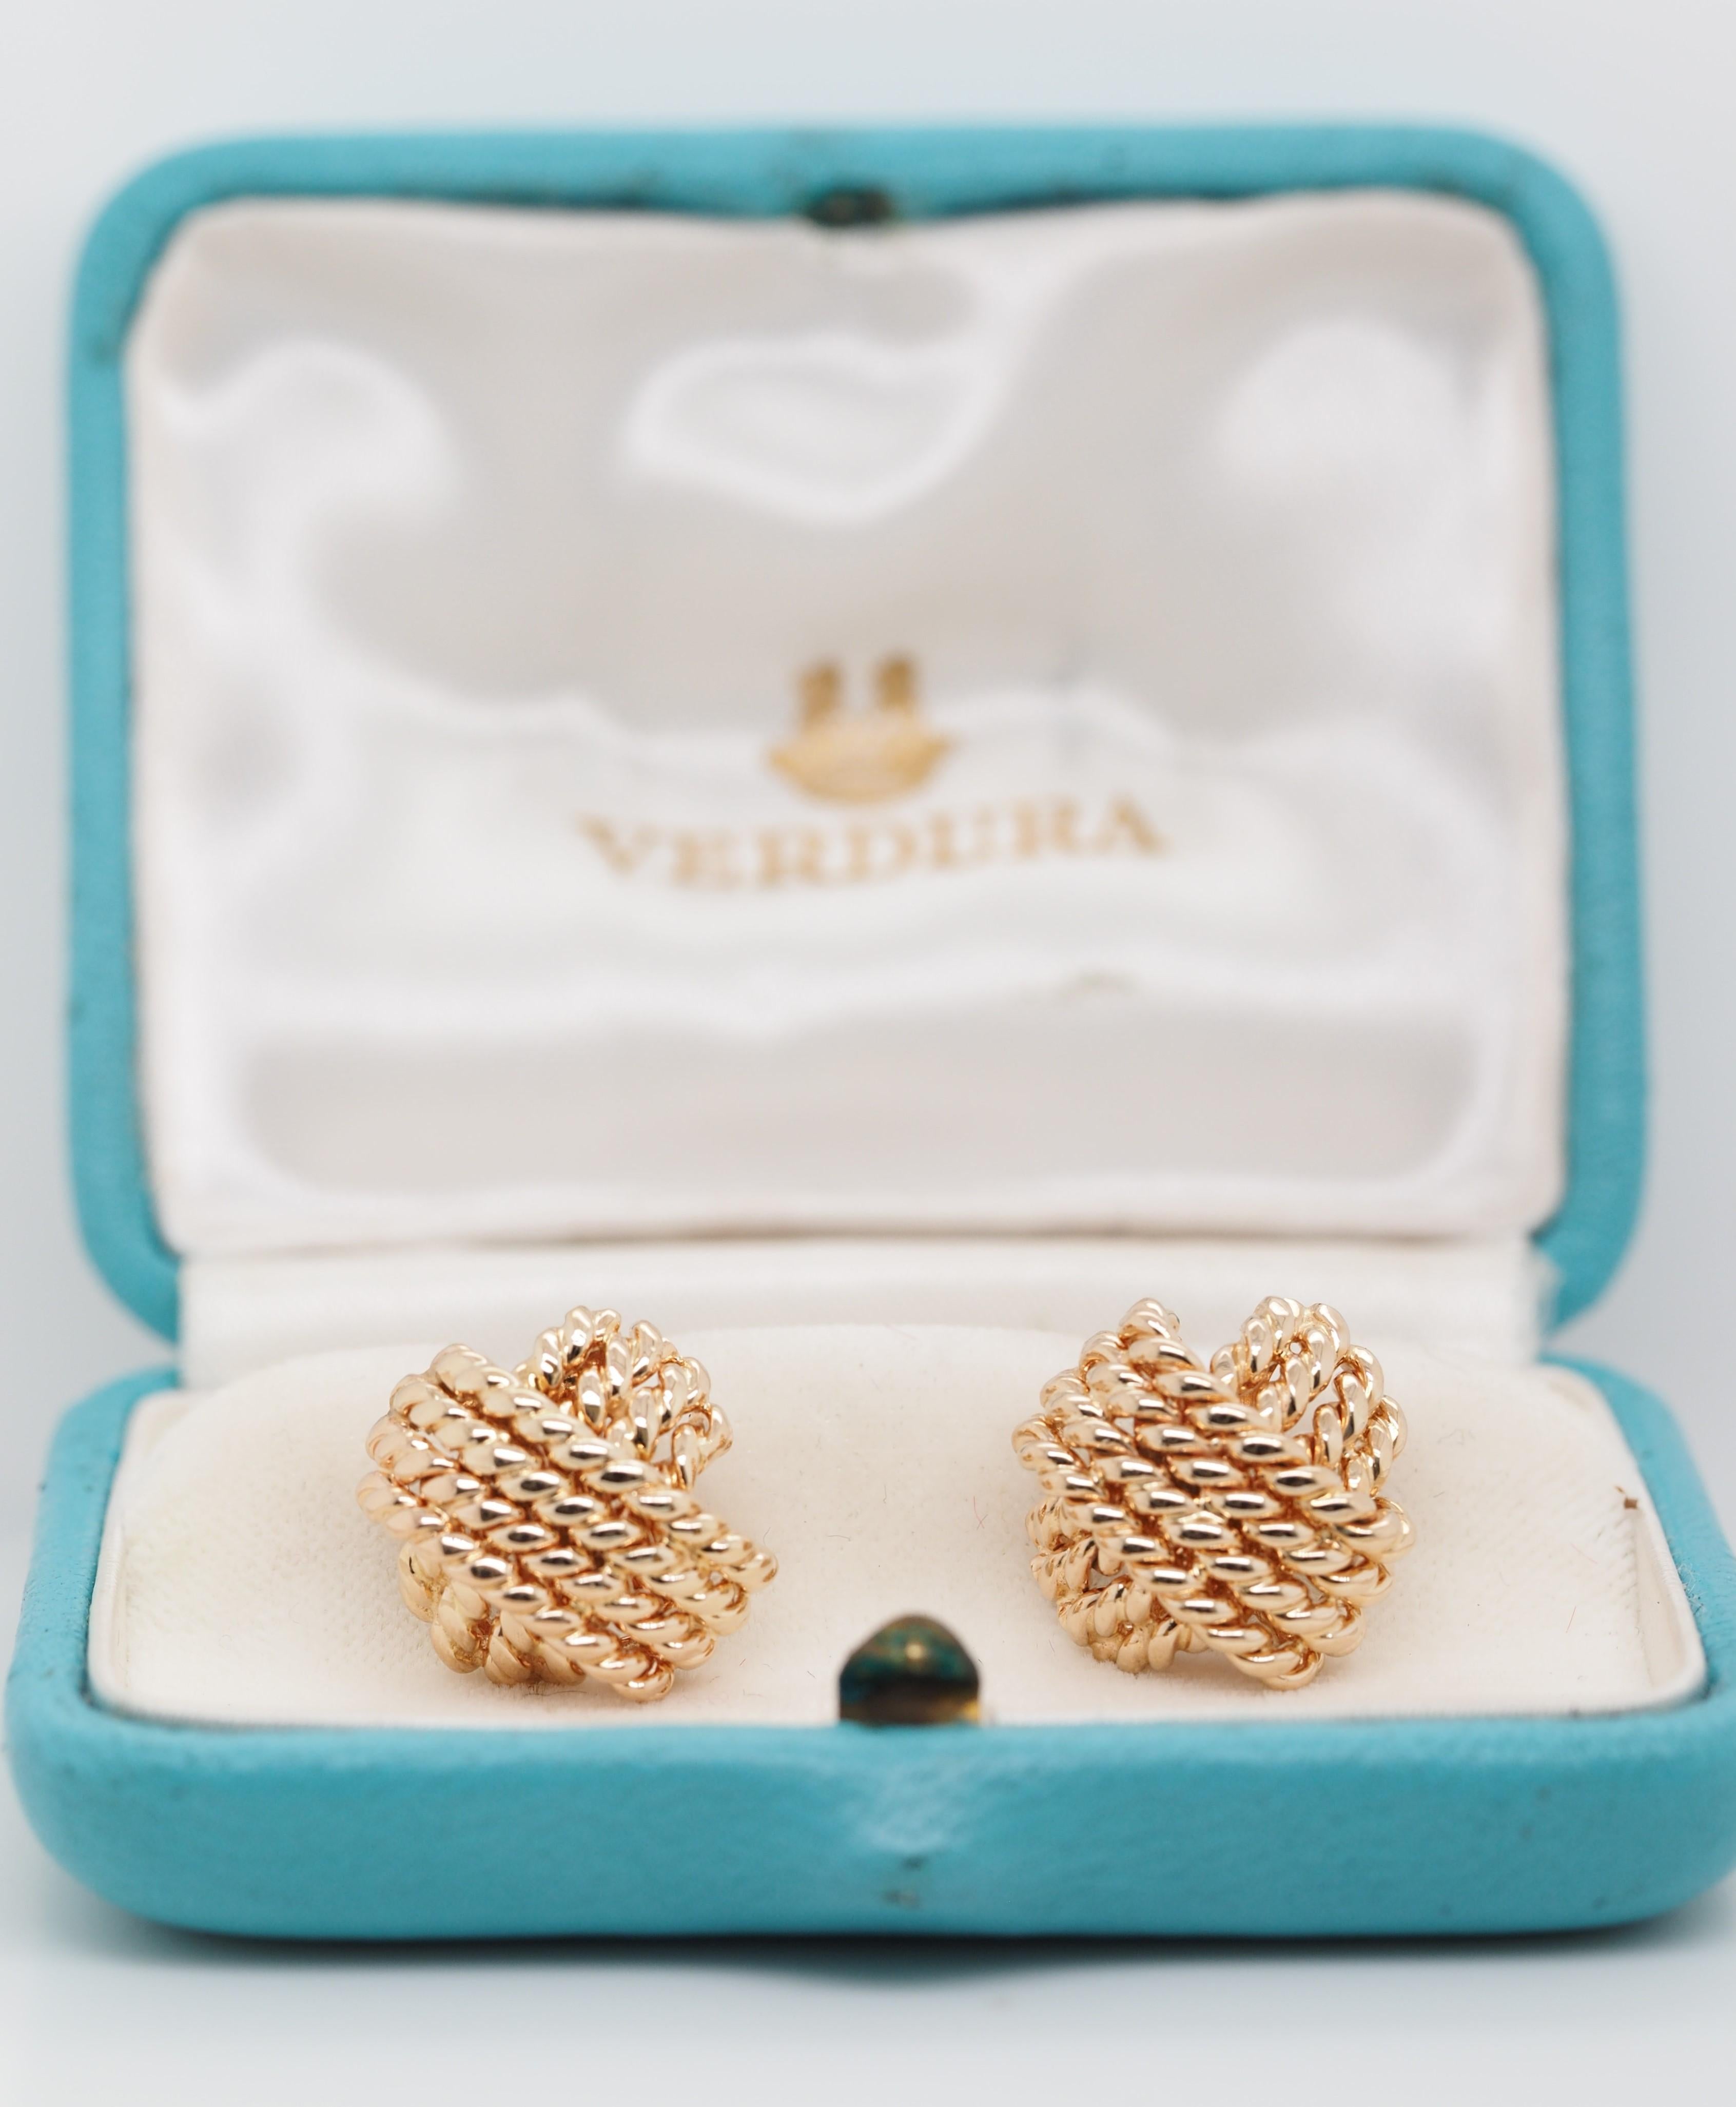 These are cufflinks that are always in style and never go out of style.
 If you want to look and like some style these are perfect.

Metal: 14K Yellow Gold

Hallmarks: 14K VERDURA

Weight: 18 Grams

Size: 17.7 mm x 17.7 mm

Condition: In good